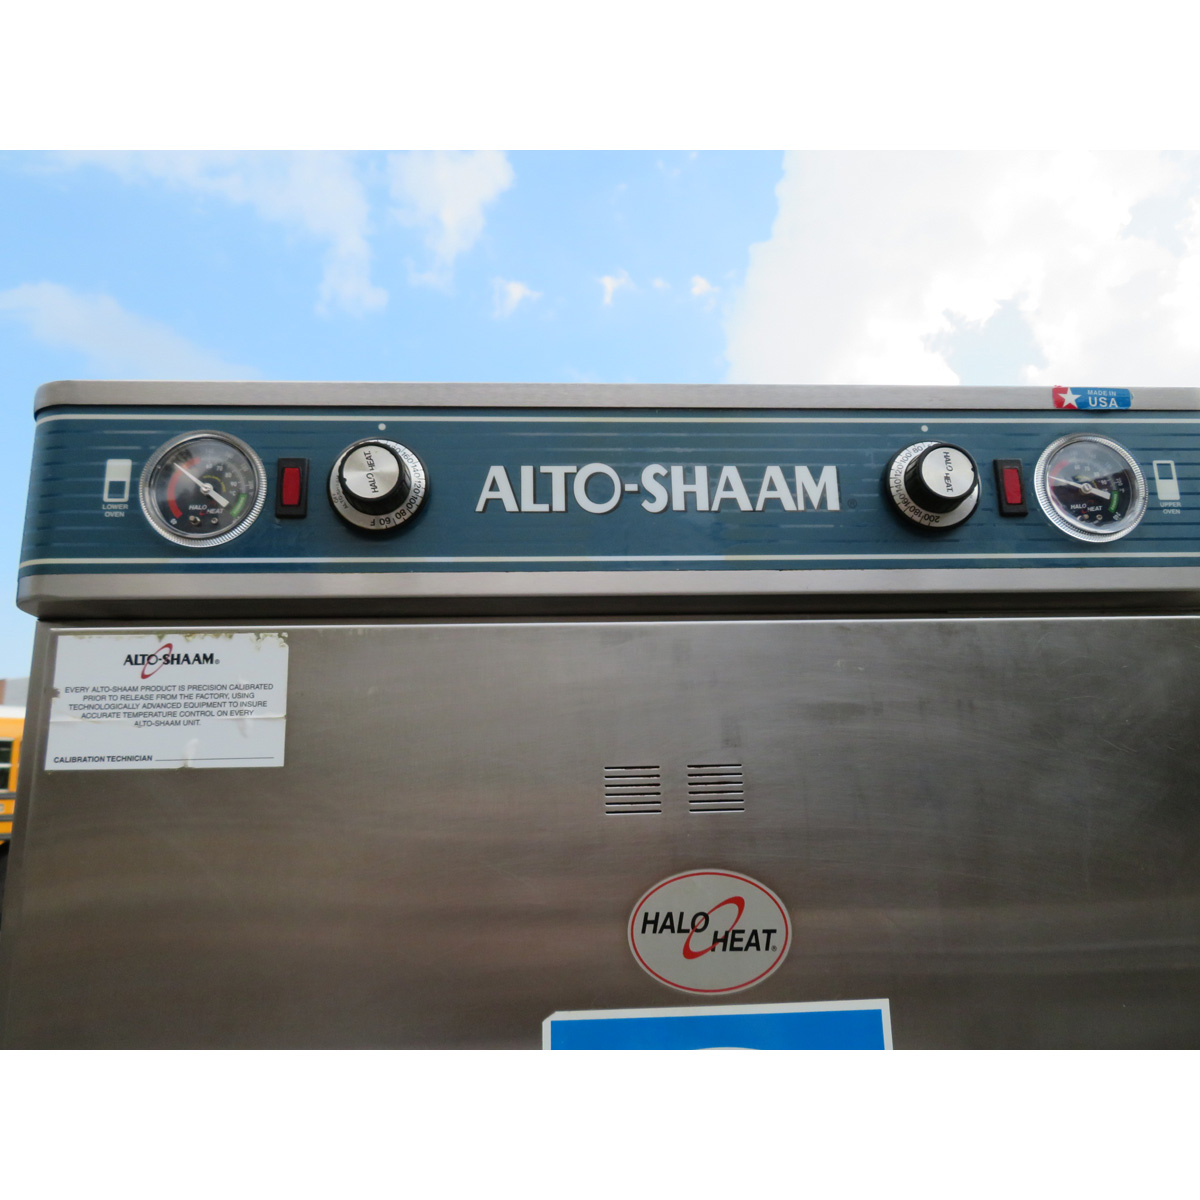 Alto Shaam 1200-UP Low Temperature Double Hot Food Holding Cabinet, Used Good Condition image 7